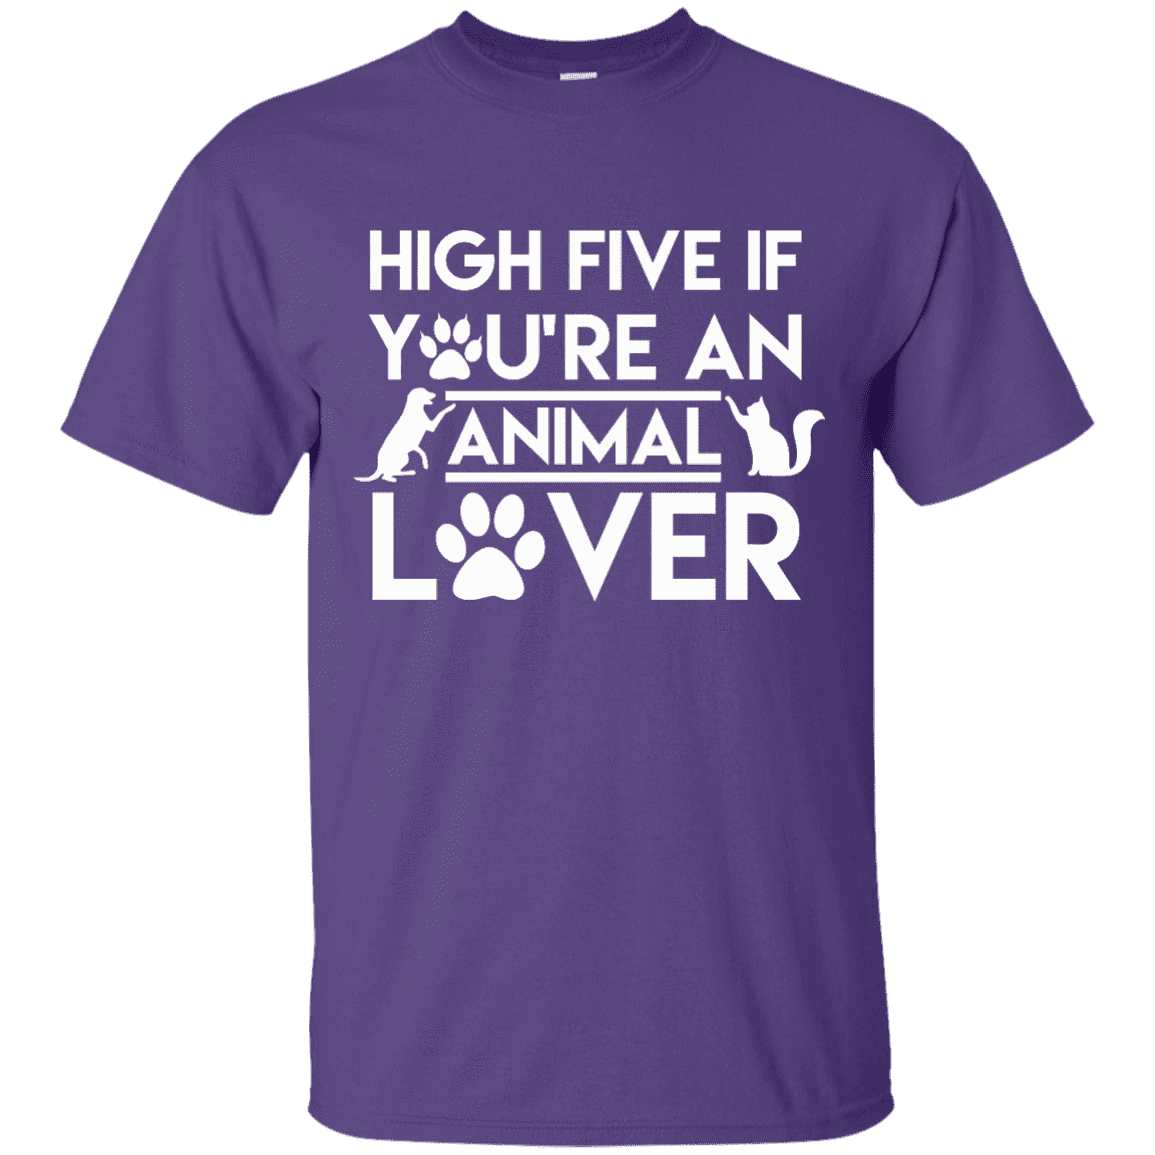 High Five If You're An Animal Lover - T Shirt.